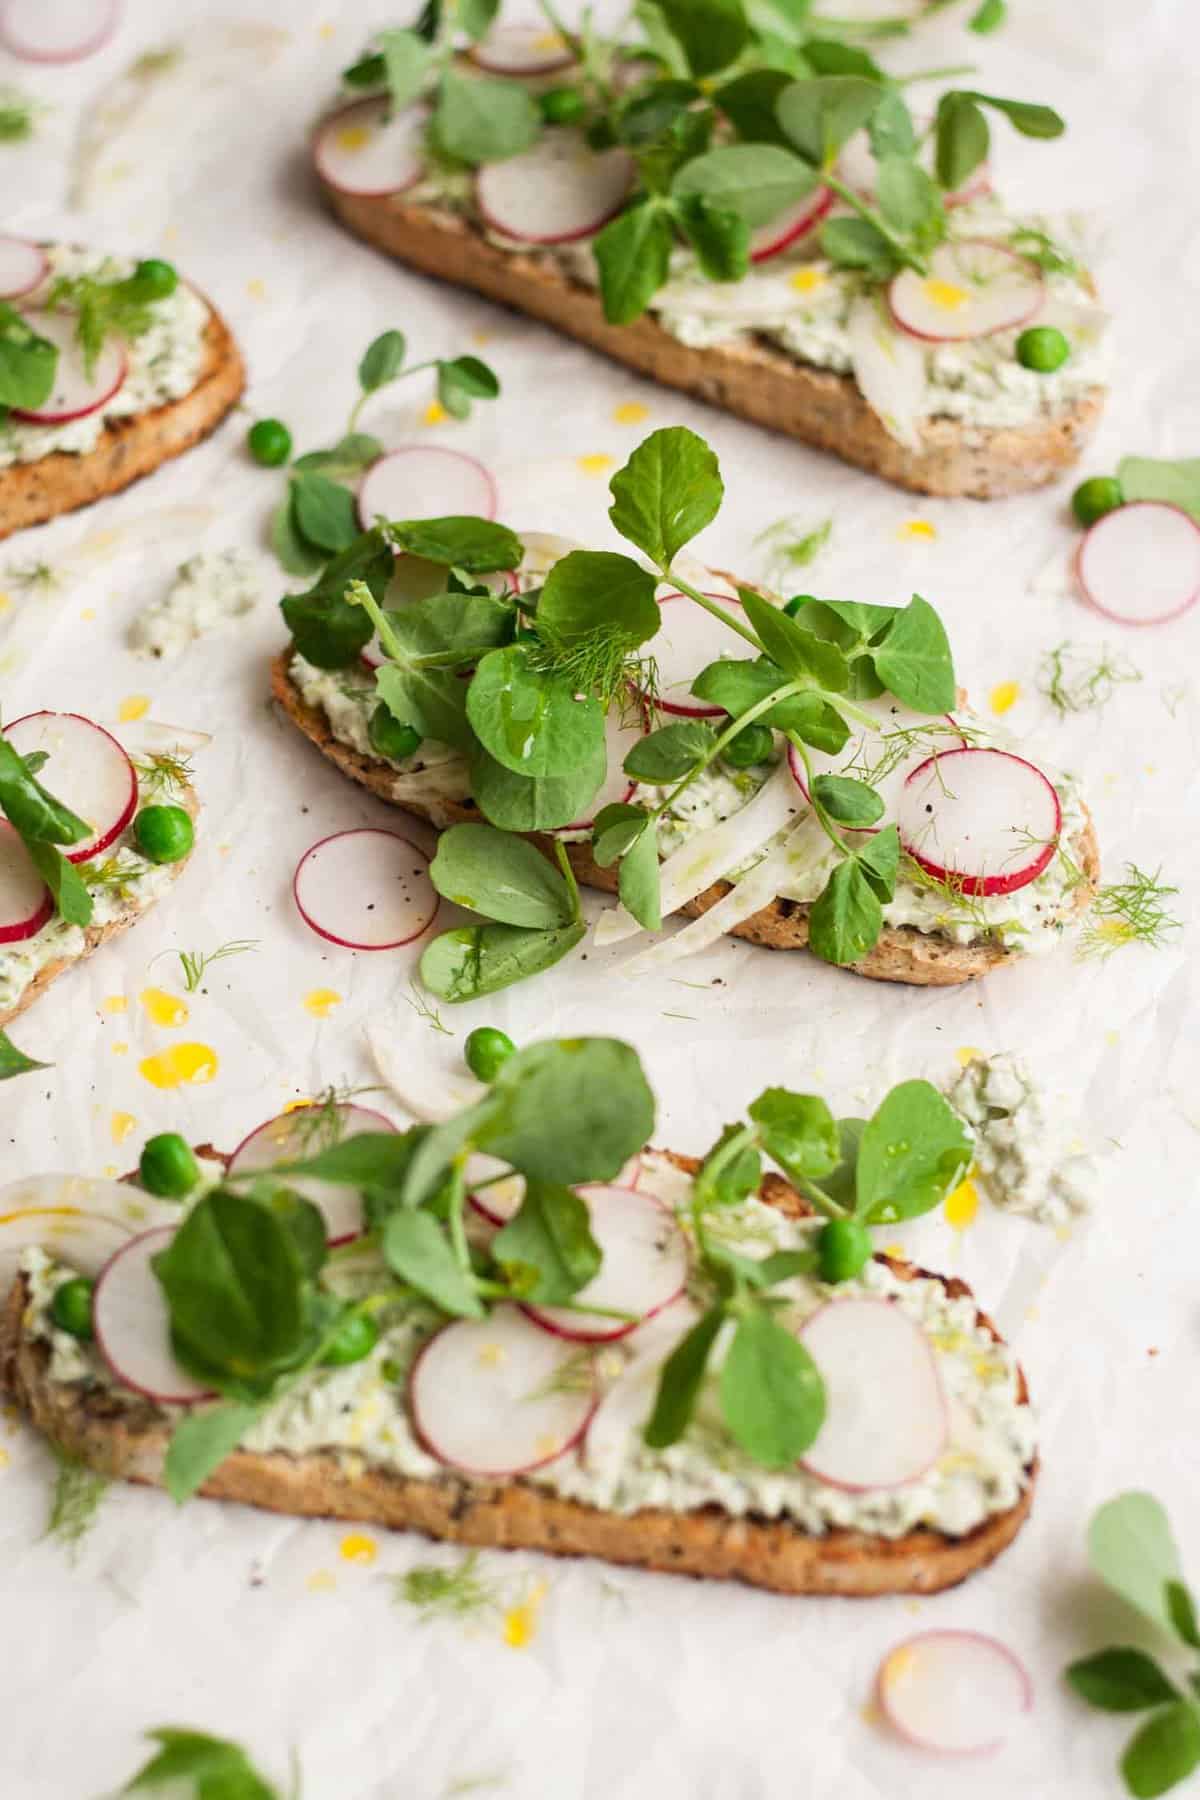 A slice of toasted bread topped with cream cheese, fennel, radish and peashoots.